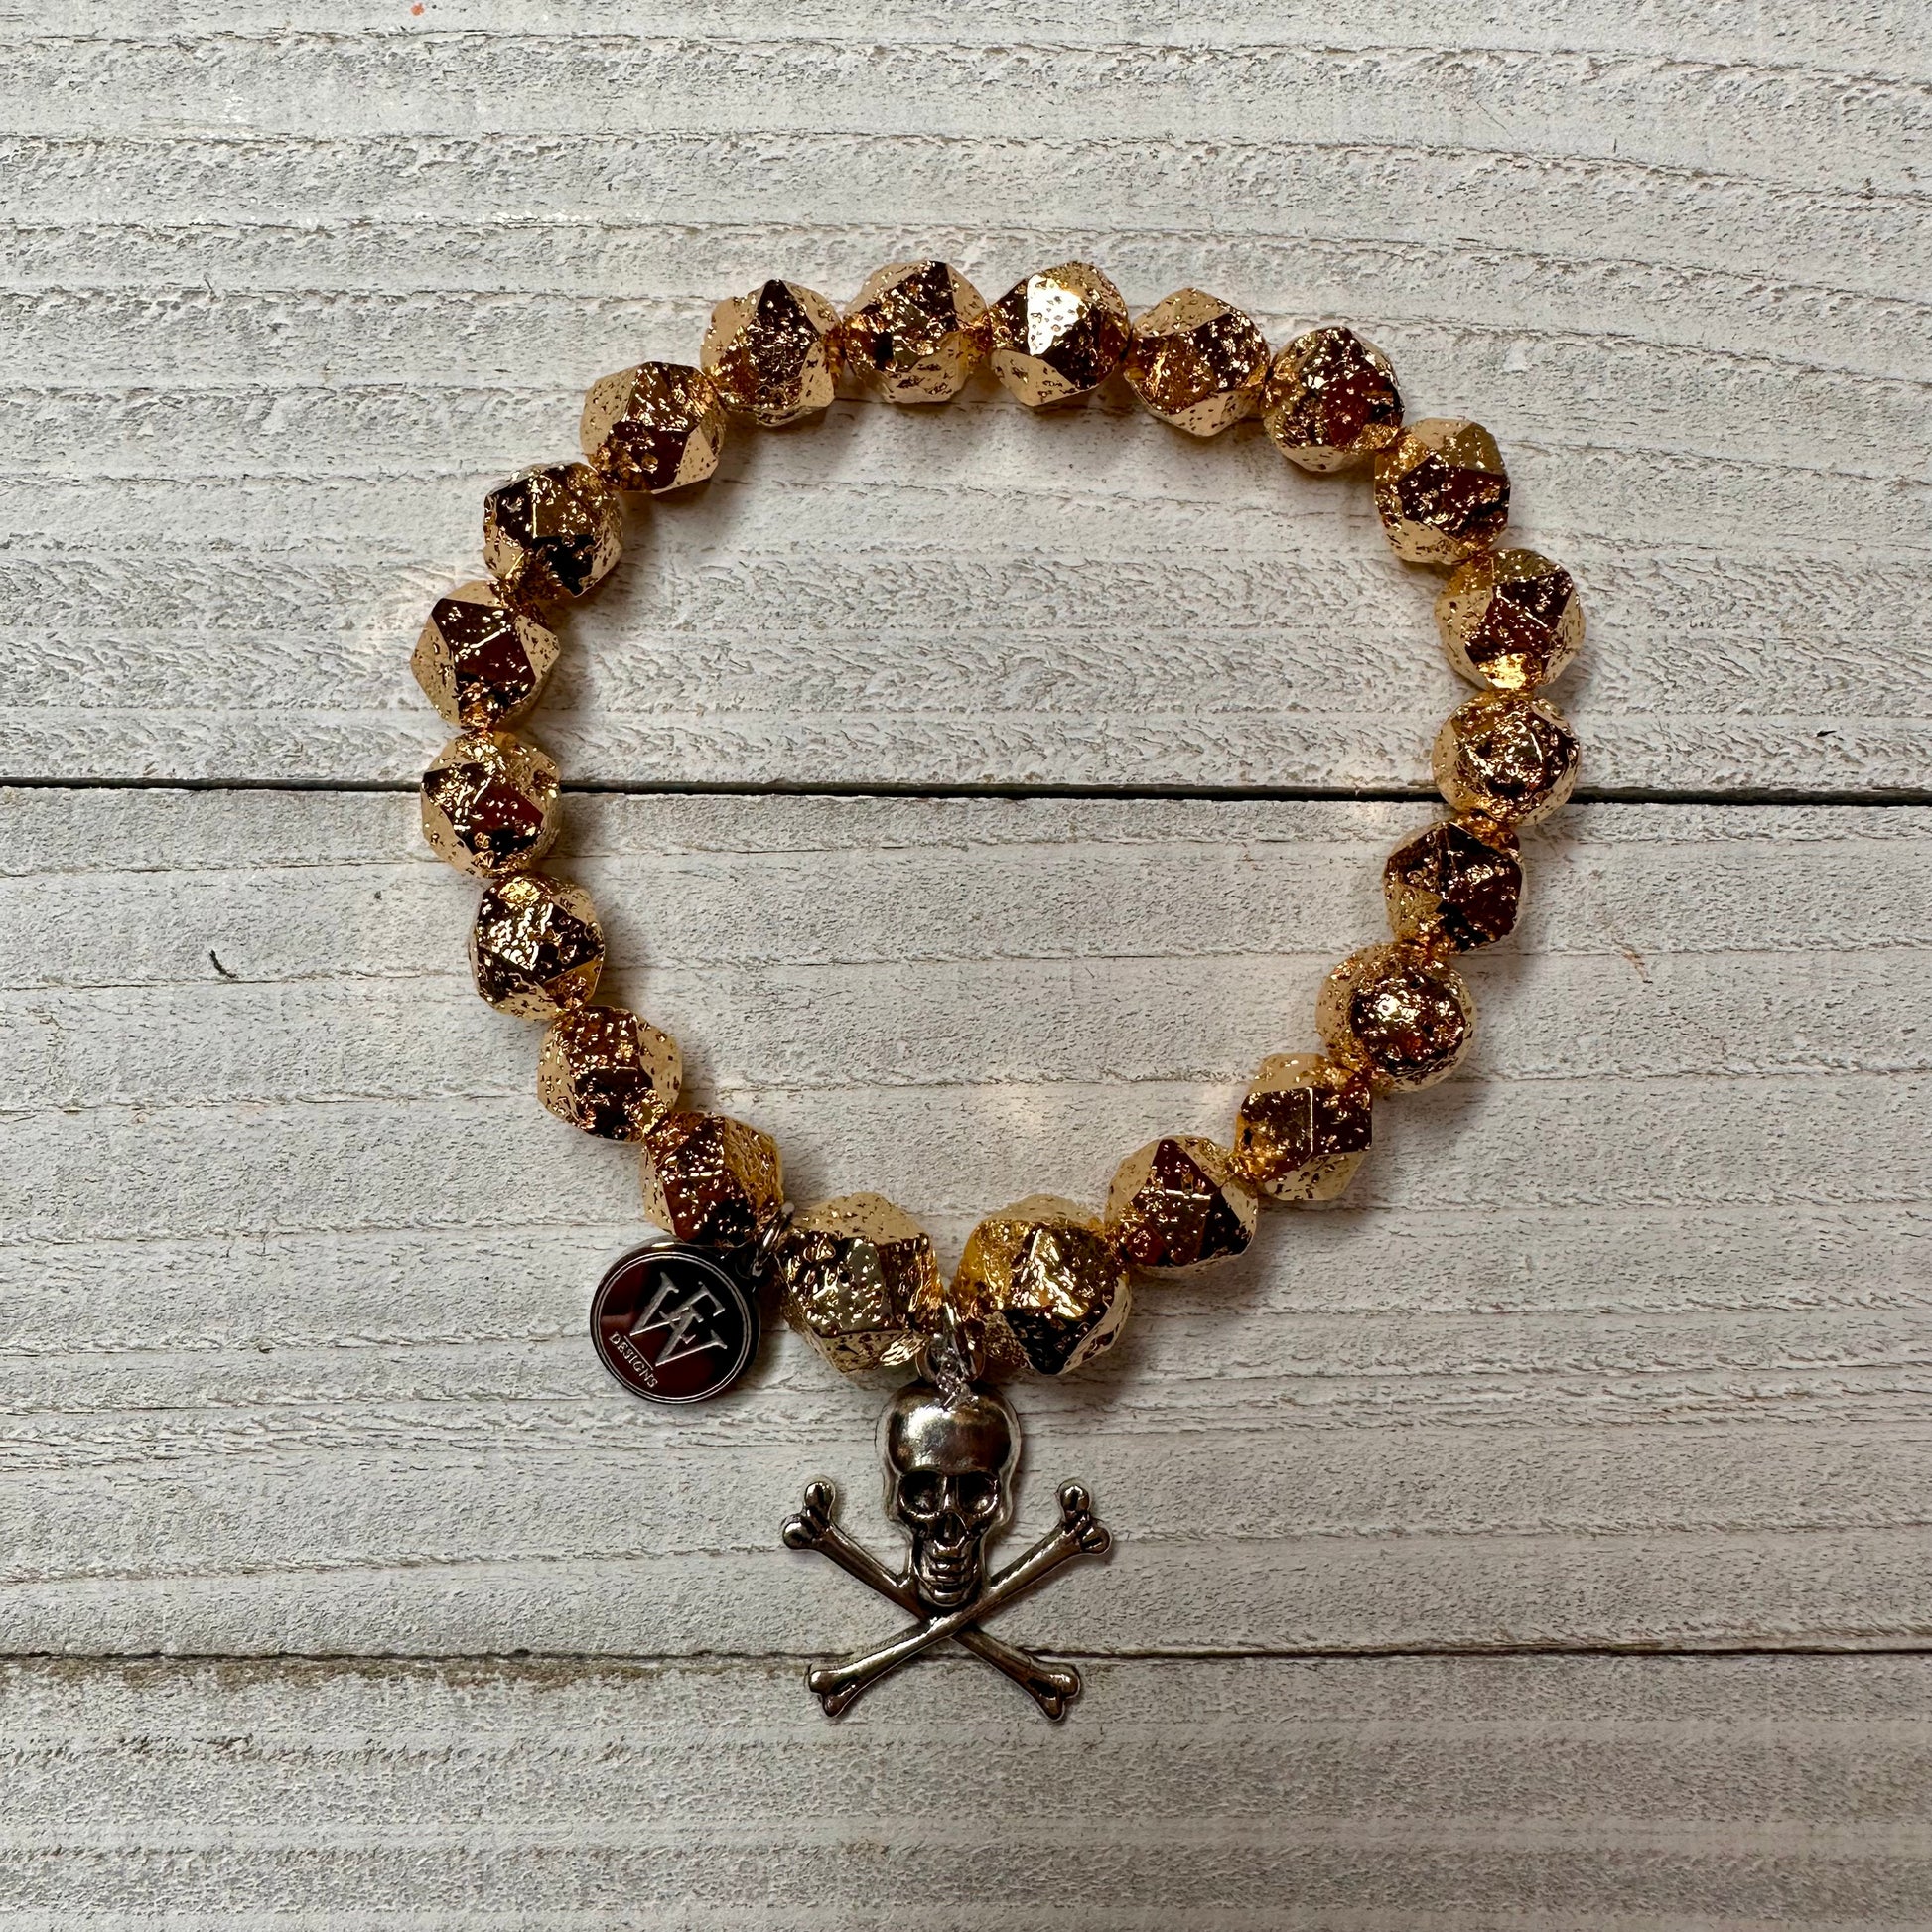 Gold Plated Hematite Beads Bracelet with a Metal Crossed Bones and Skull Charm